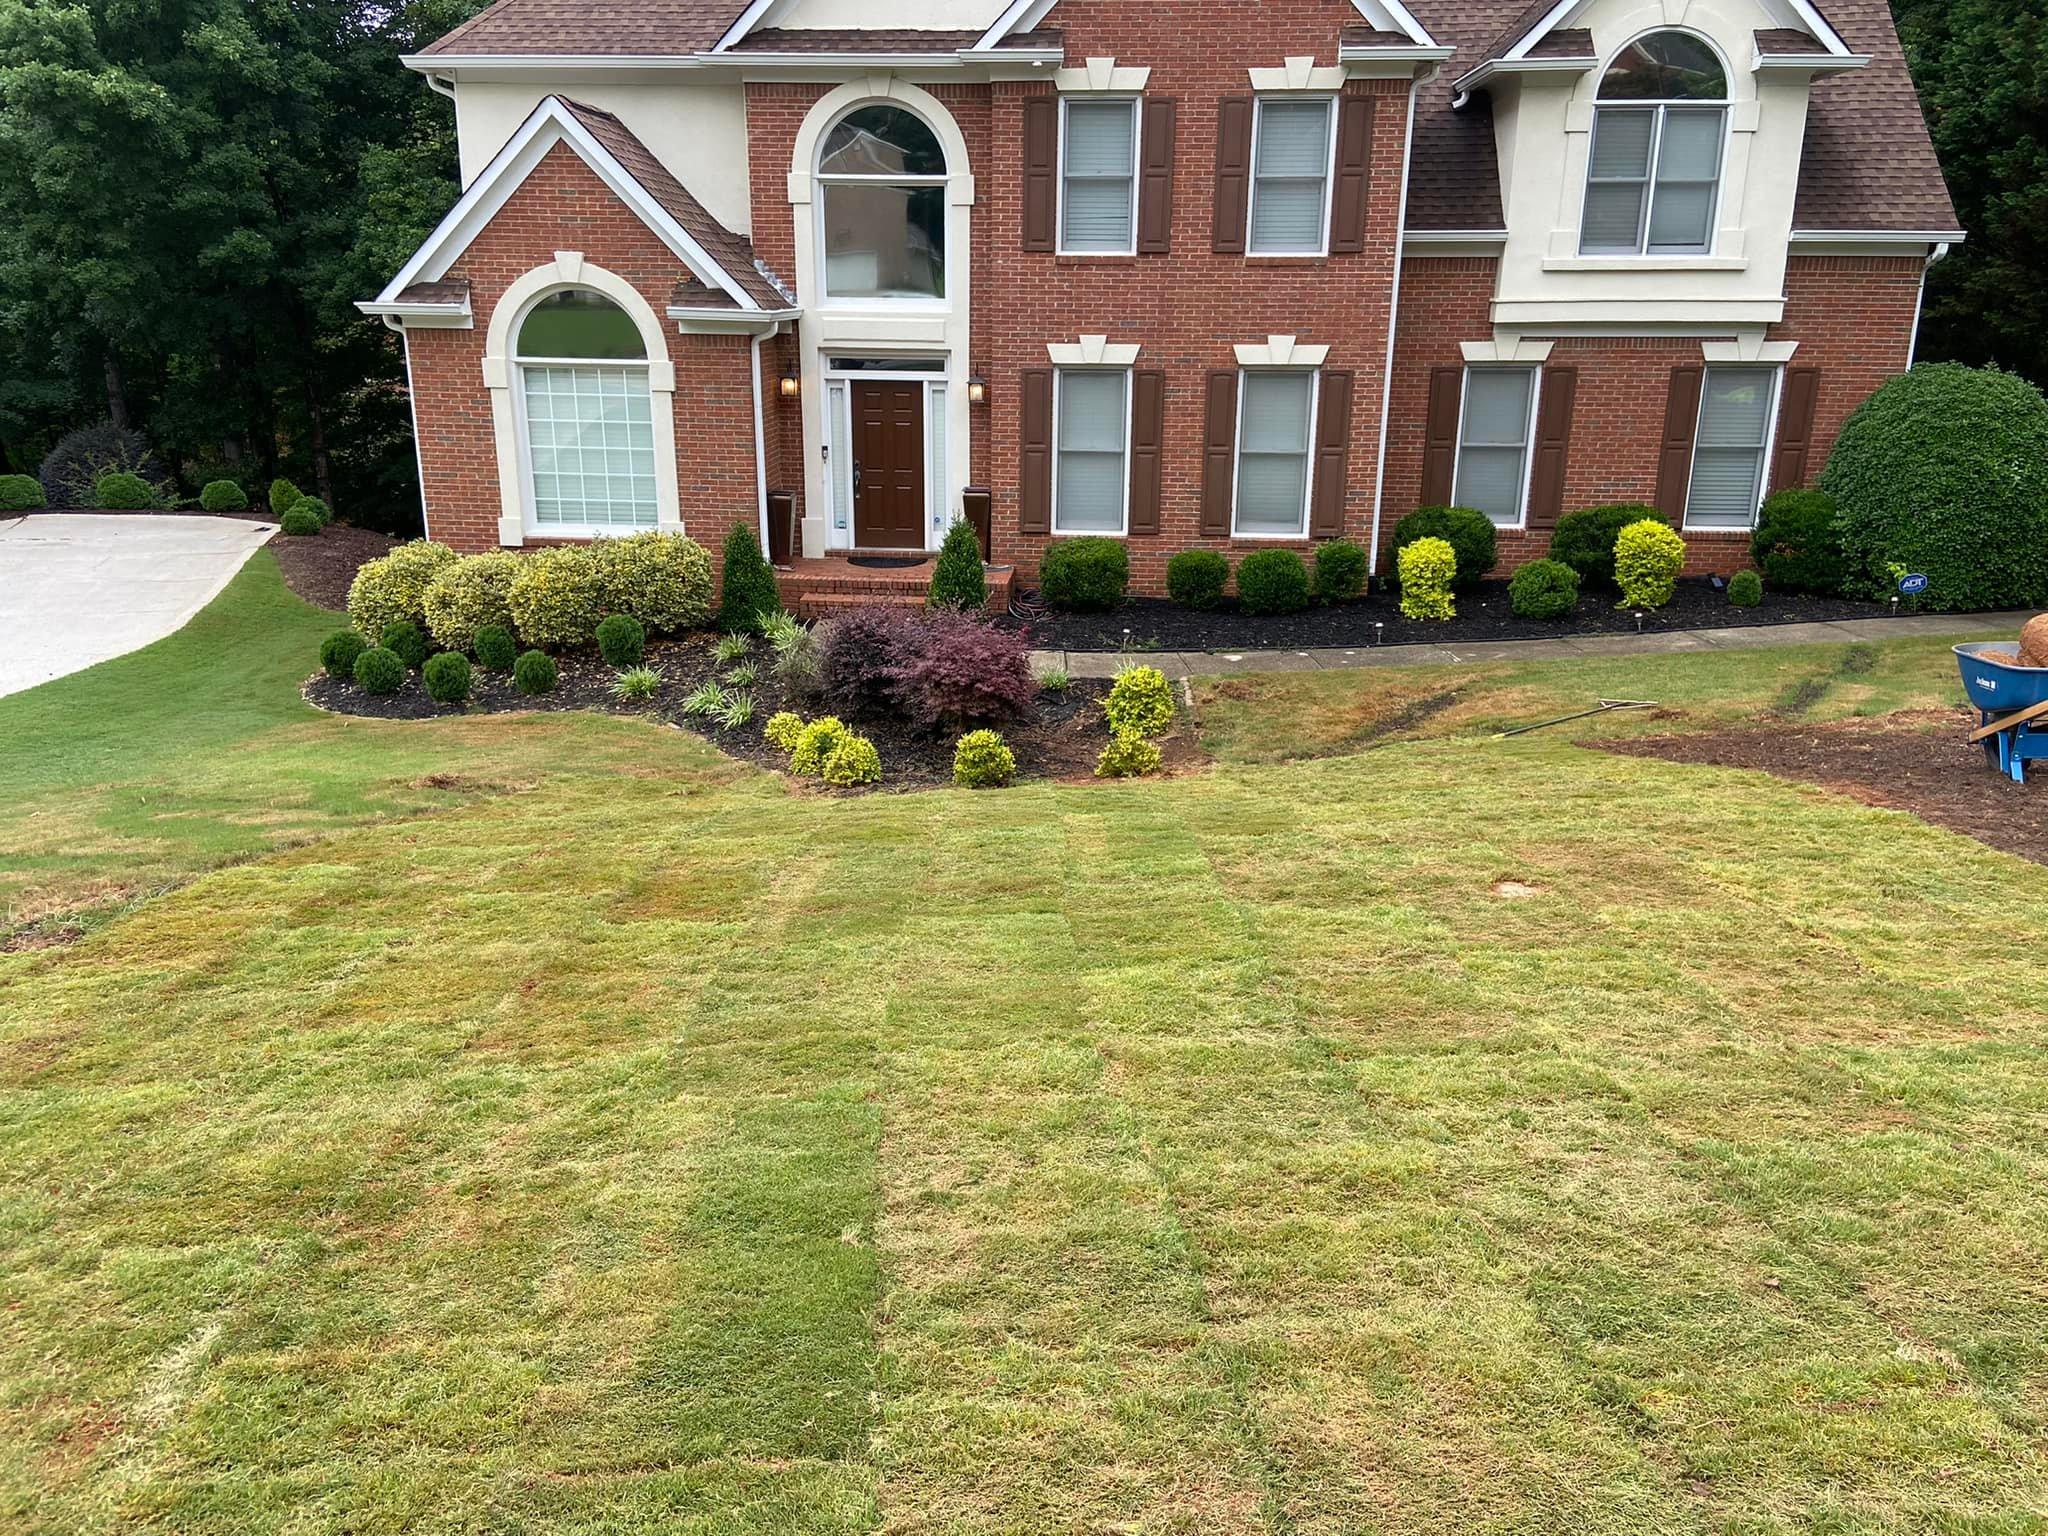 Landscaping company Two Brothers Landscaping in Atlanta, Georgia